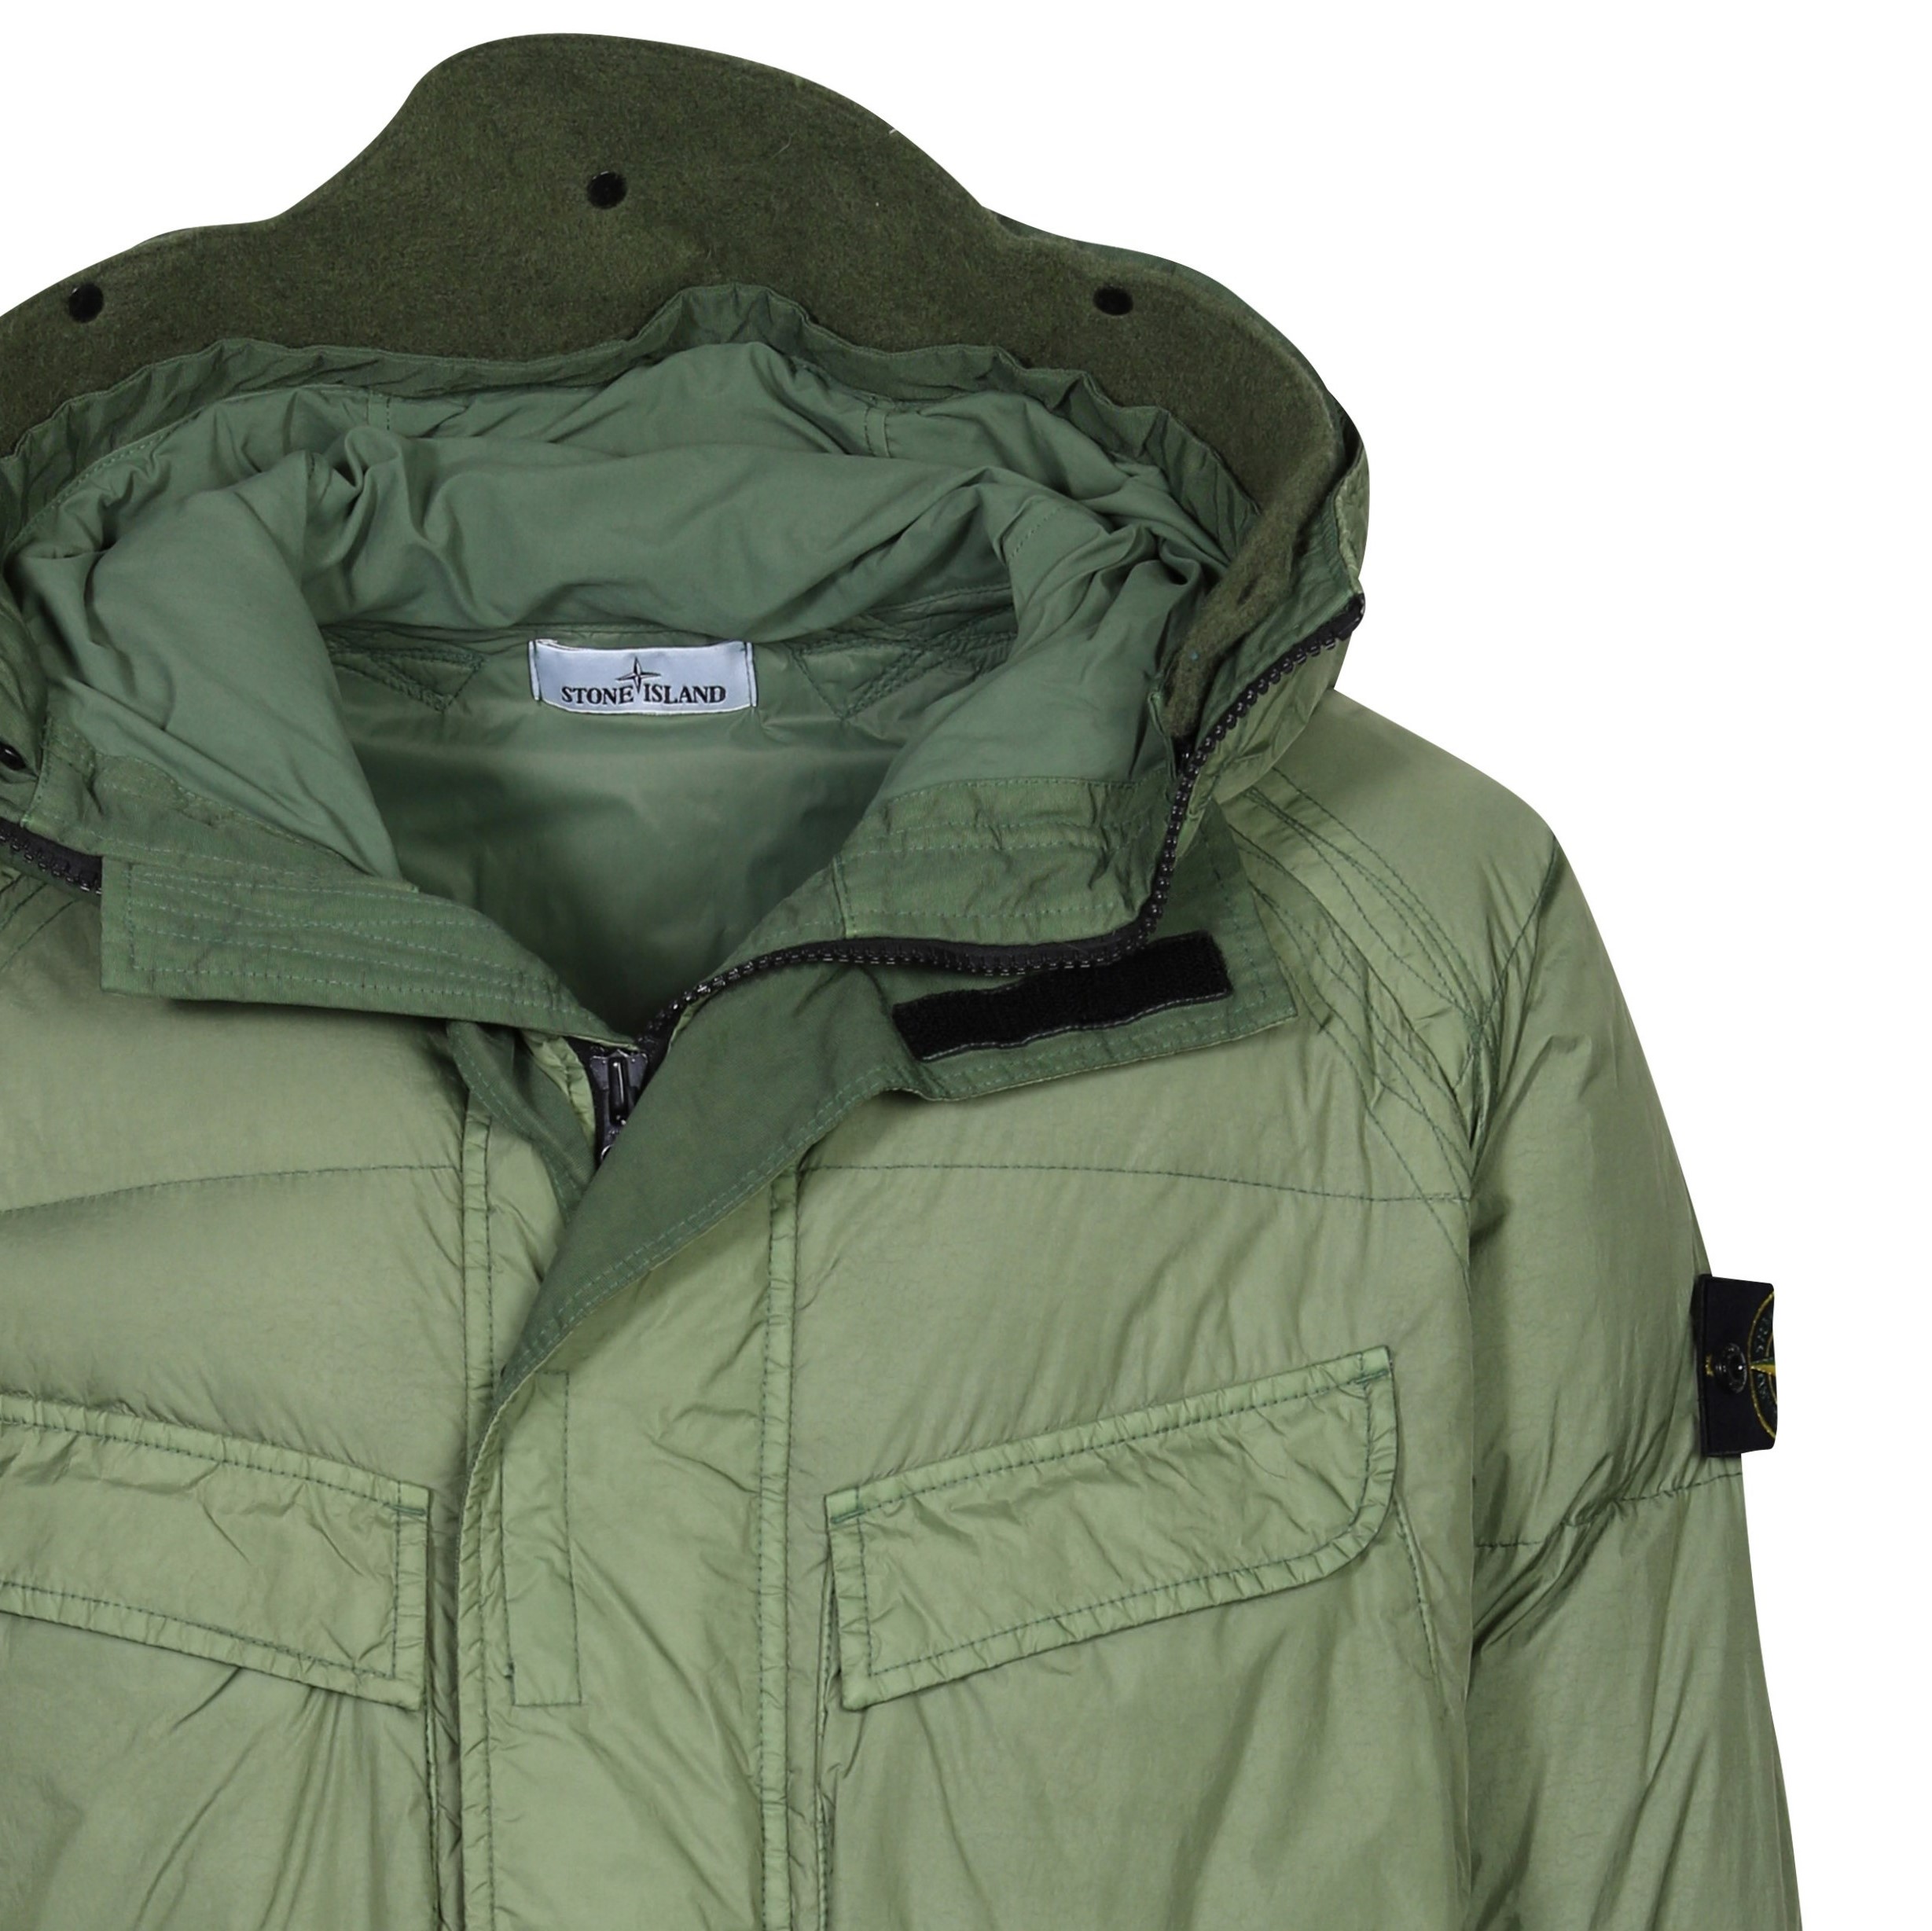 Stone Island Garment Dyed Crincle Reps Ny Down Parka in Olive